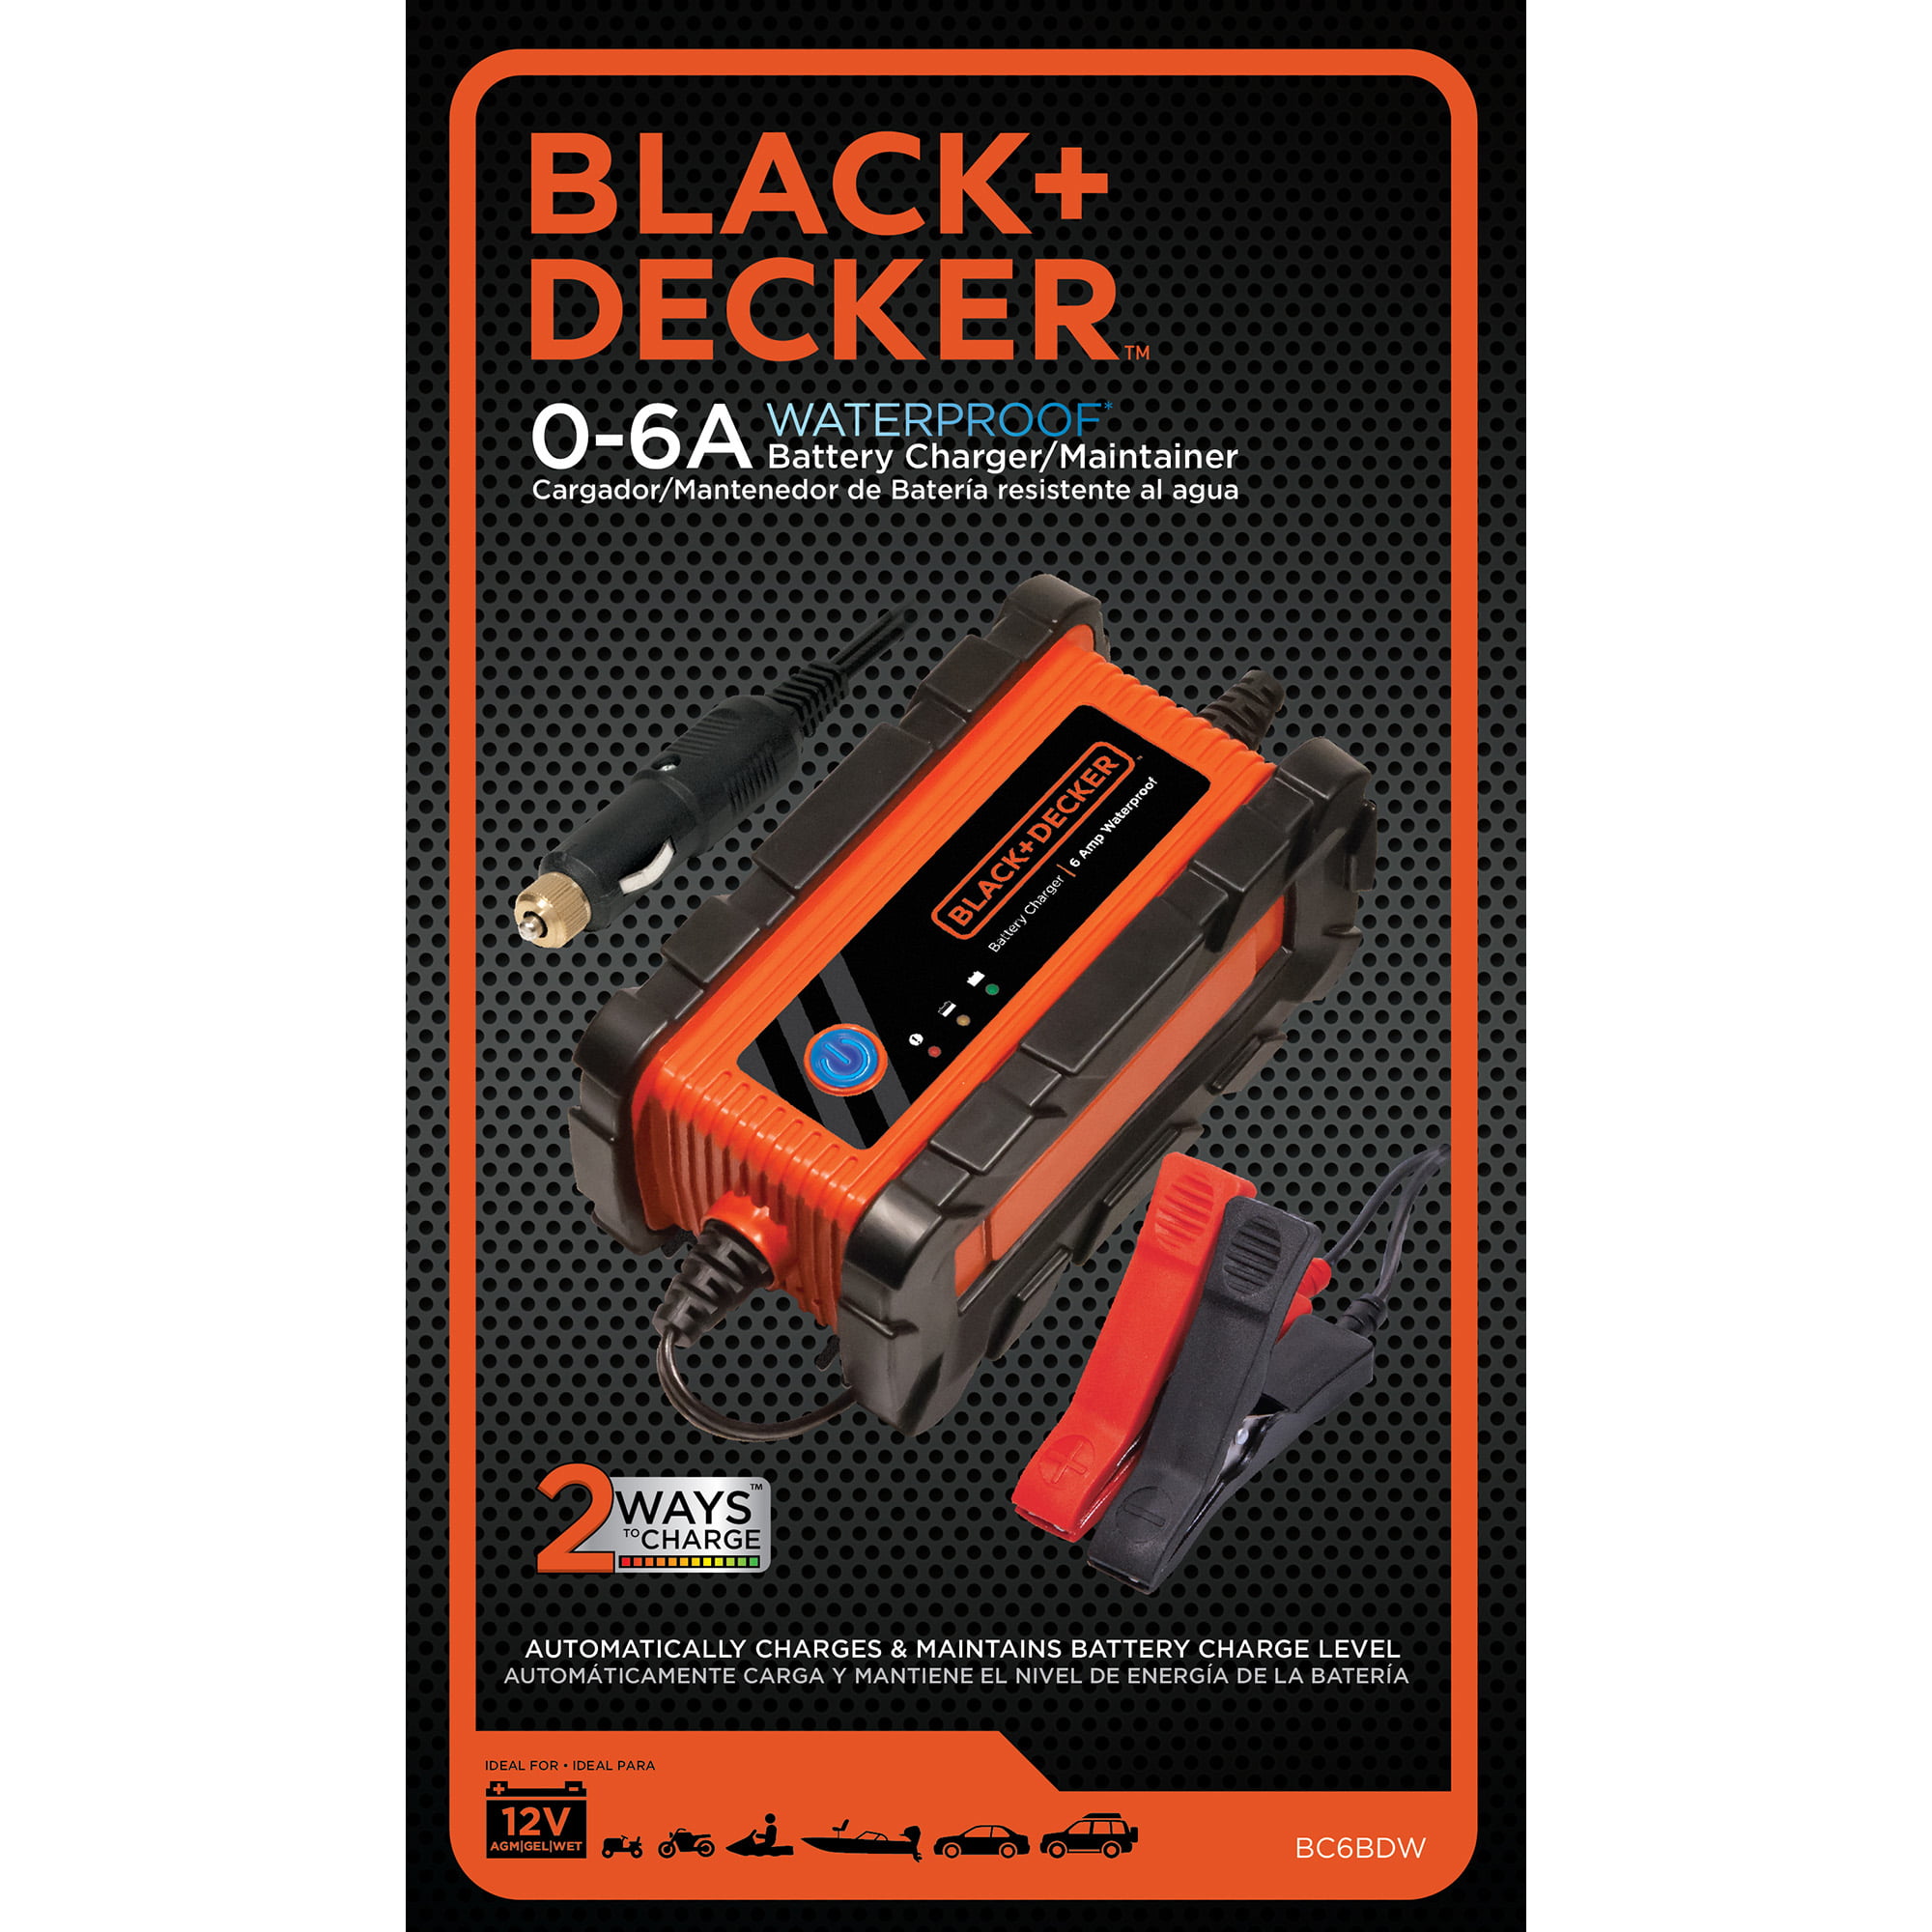 BLACK+DECKER 1.2 Amp Portable Car Battery Charger/Maintainer